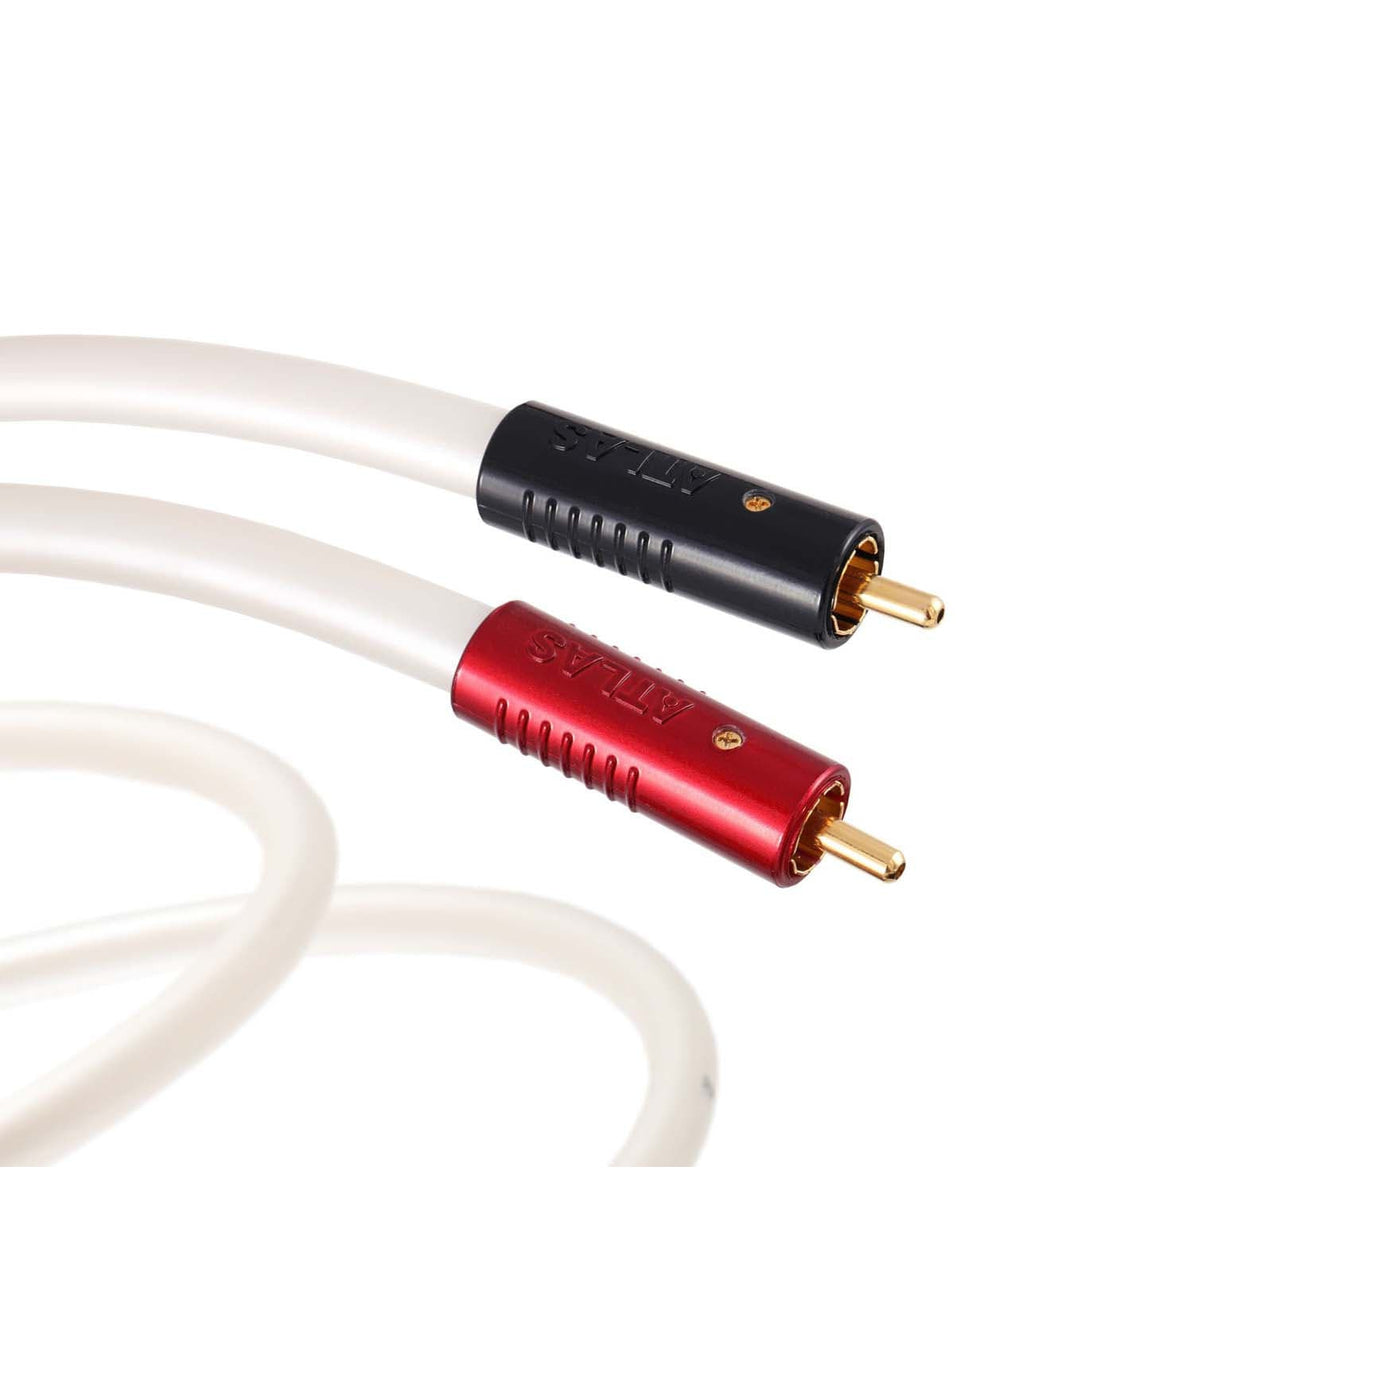 Atlas Equator Achromatic RCA Interconnect Cable at Audio Influence